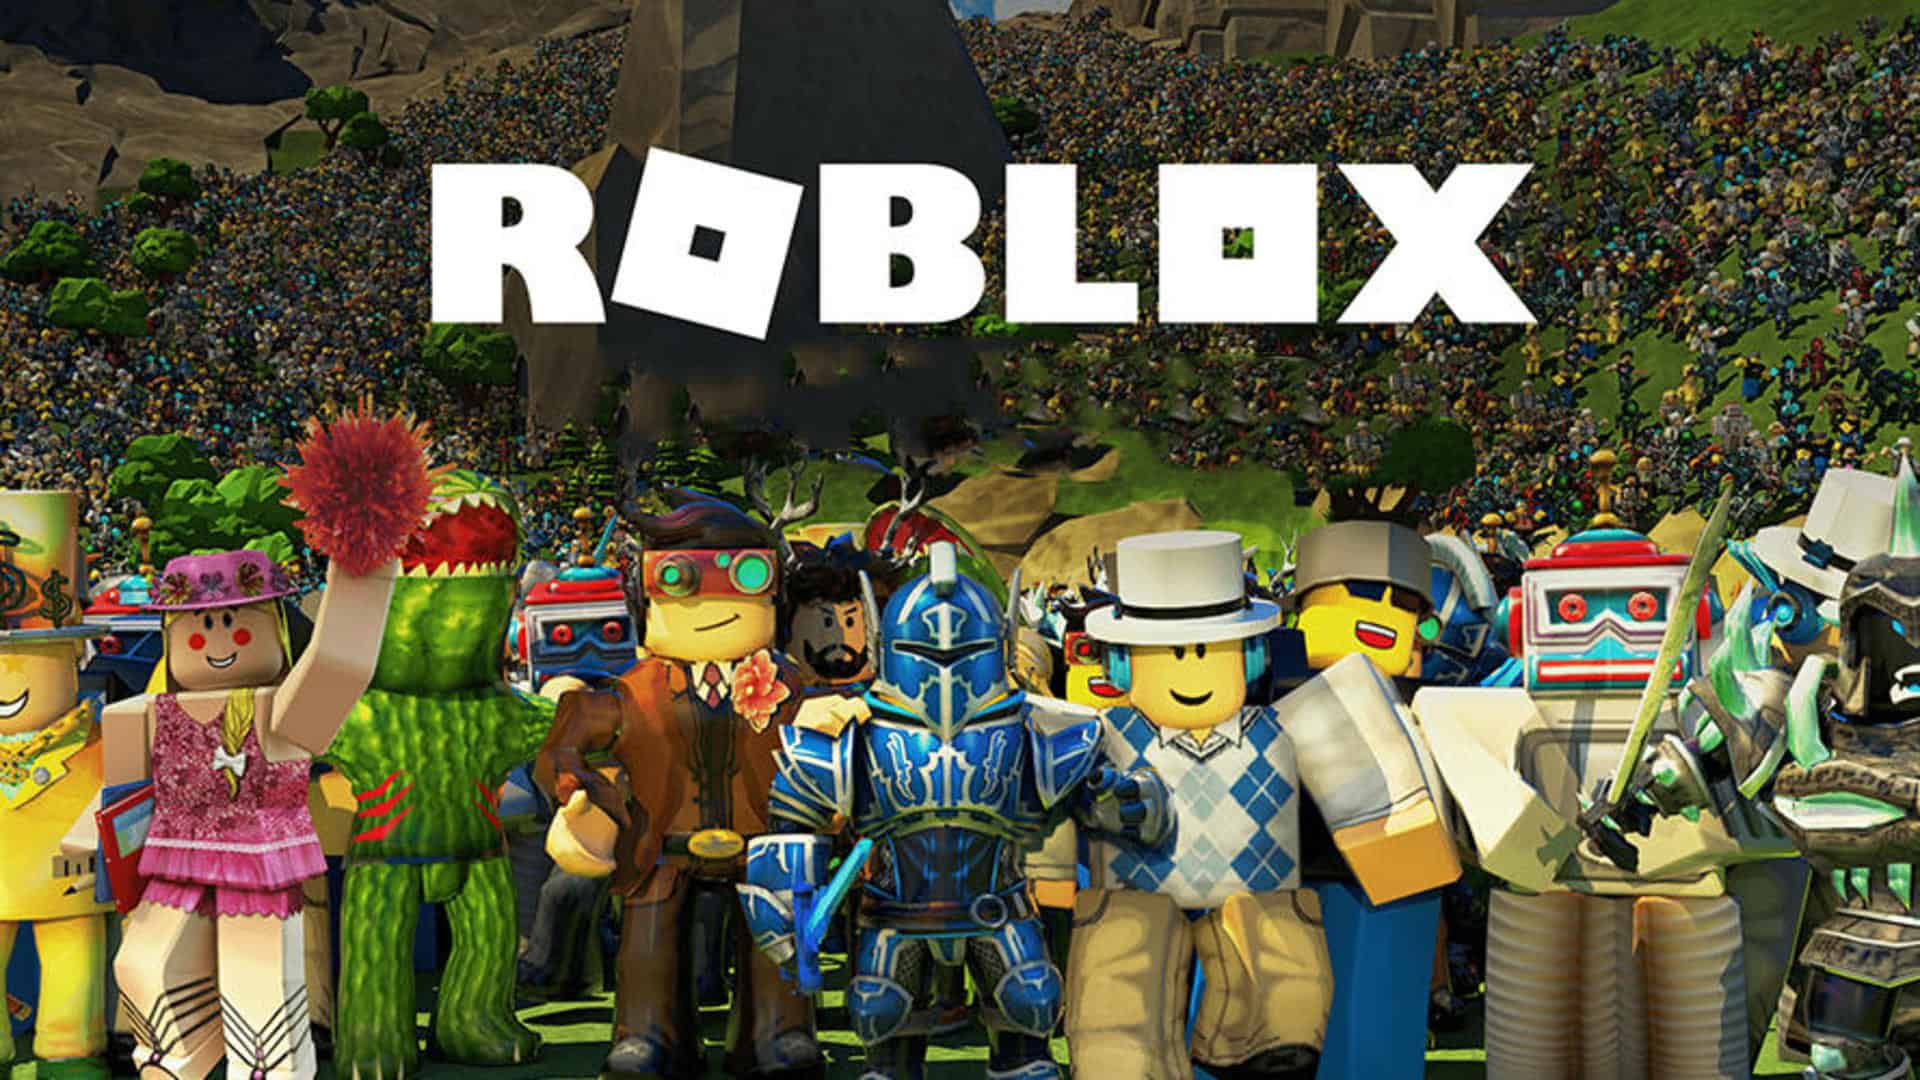 Several Roblox characters stand in front of the game's logo.